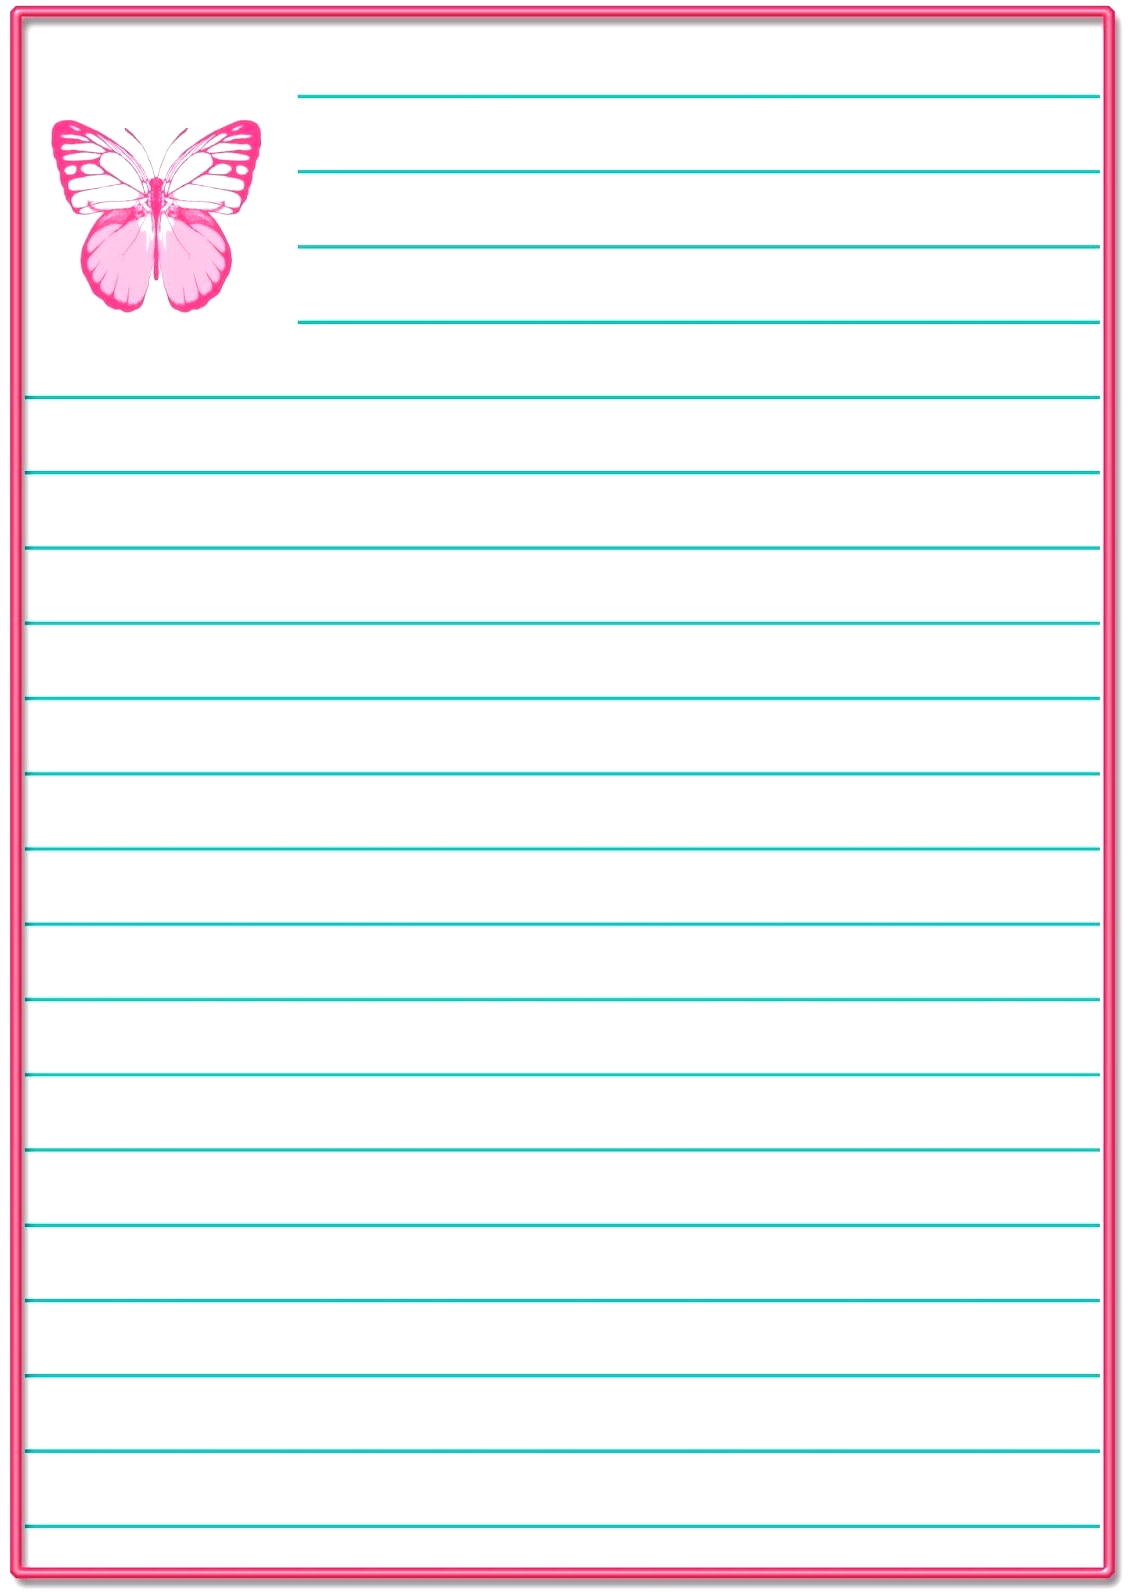 Free Printable Lined Stationery Templates